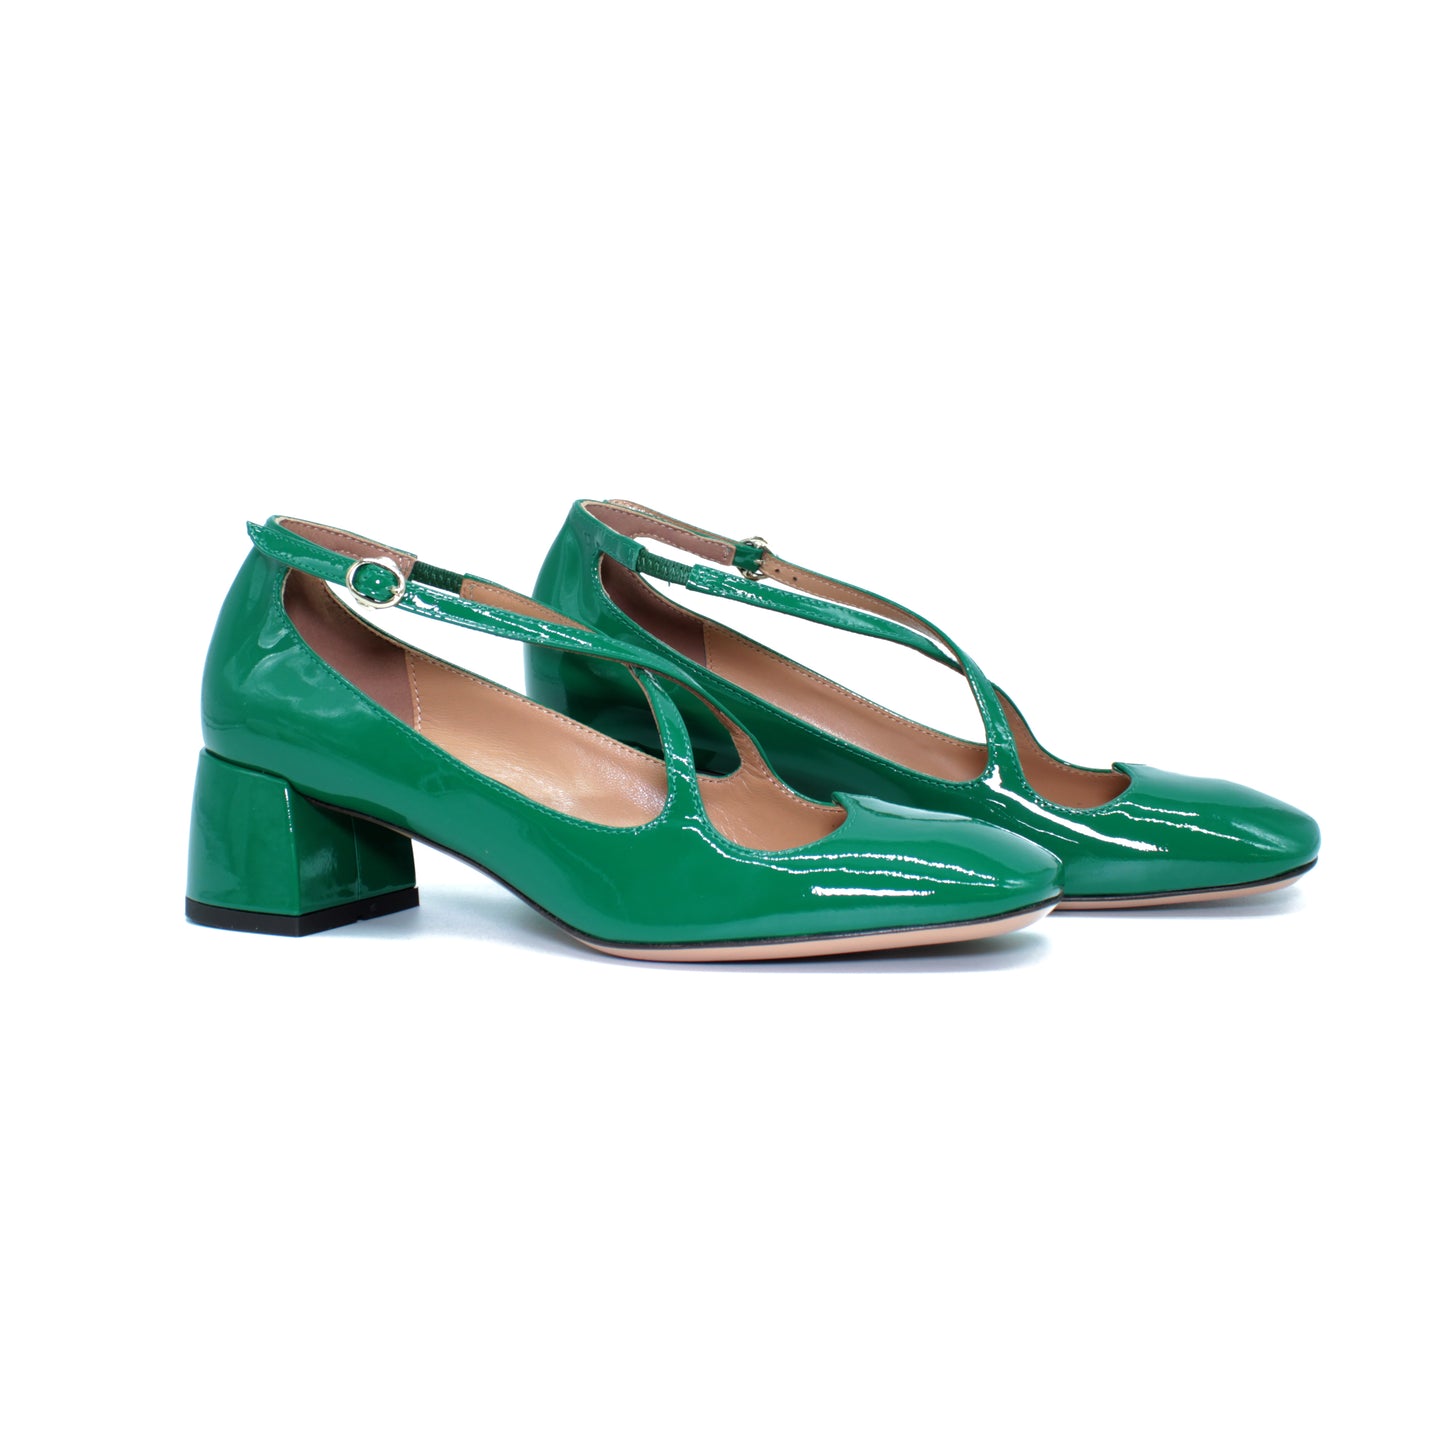 Pump Two for Love in forest-colored patent leather